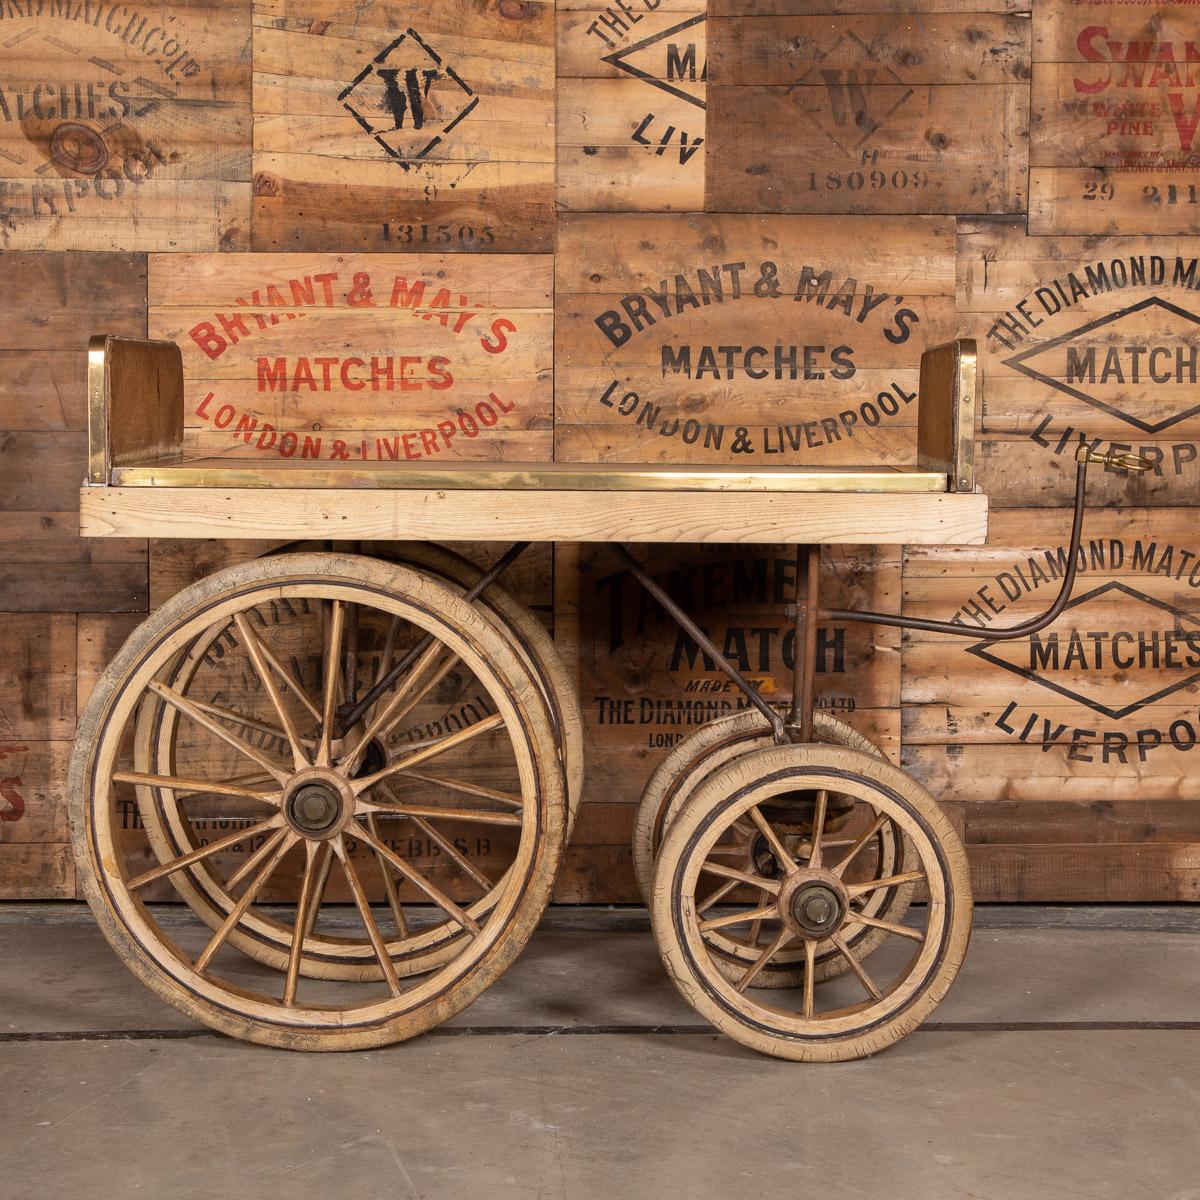 Antique early 20th century Parisian patisserie cart, used circa 1900s to sell pastries and fresh bread on the cobbled streets of Paris. Handcrafted out of wood with original brass fittings. A real conversation piece and a superb piece of history